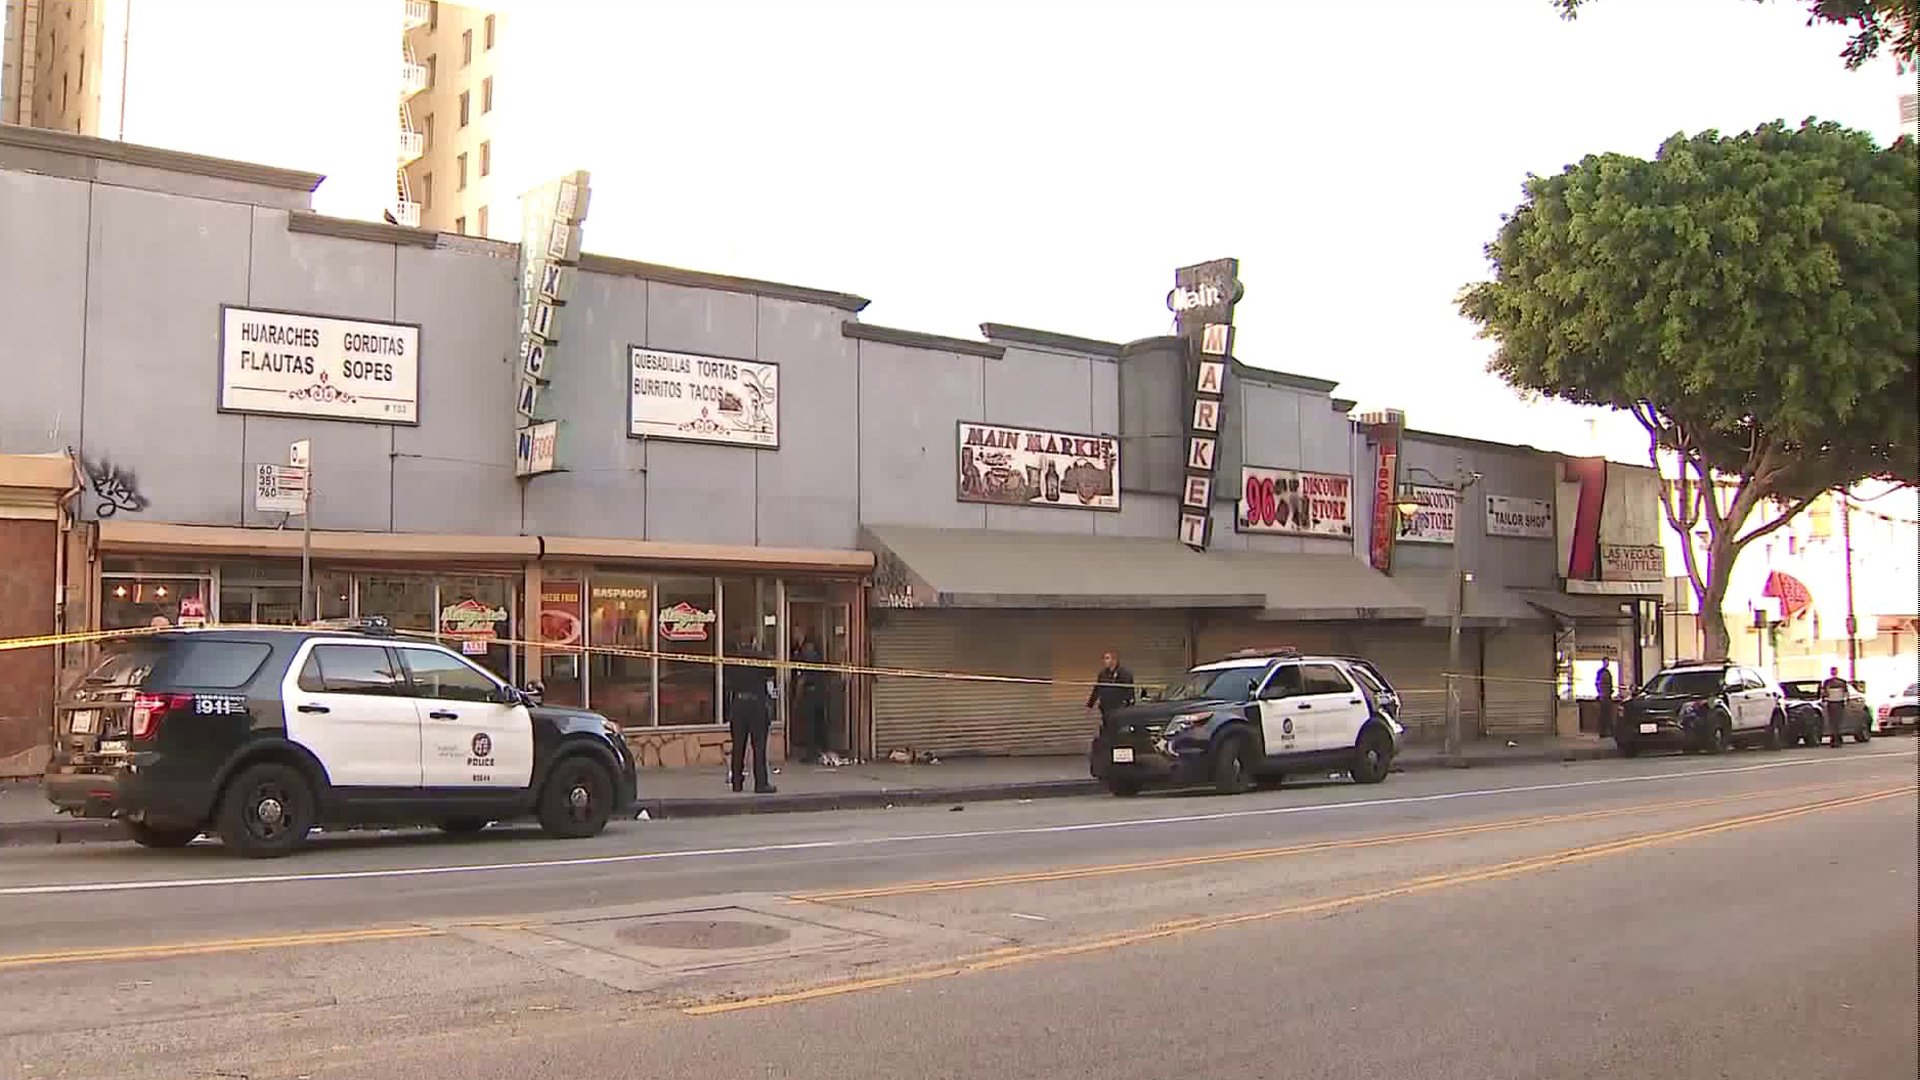 Police work the scene of a fatal stabbing in downtown L.A.'s Skid Row on Jan. 1, 2020. (Credit: KTLA)